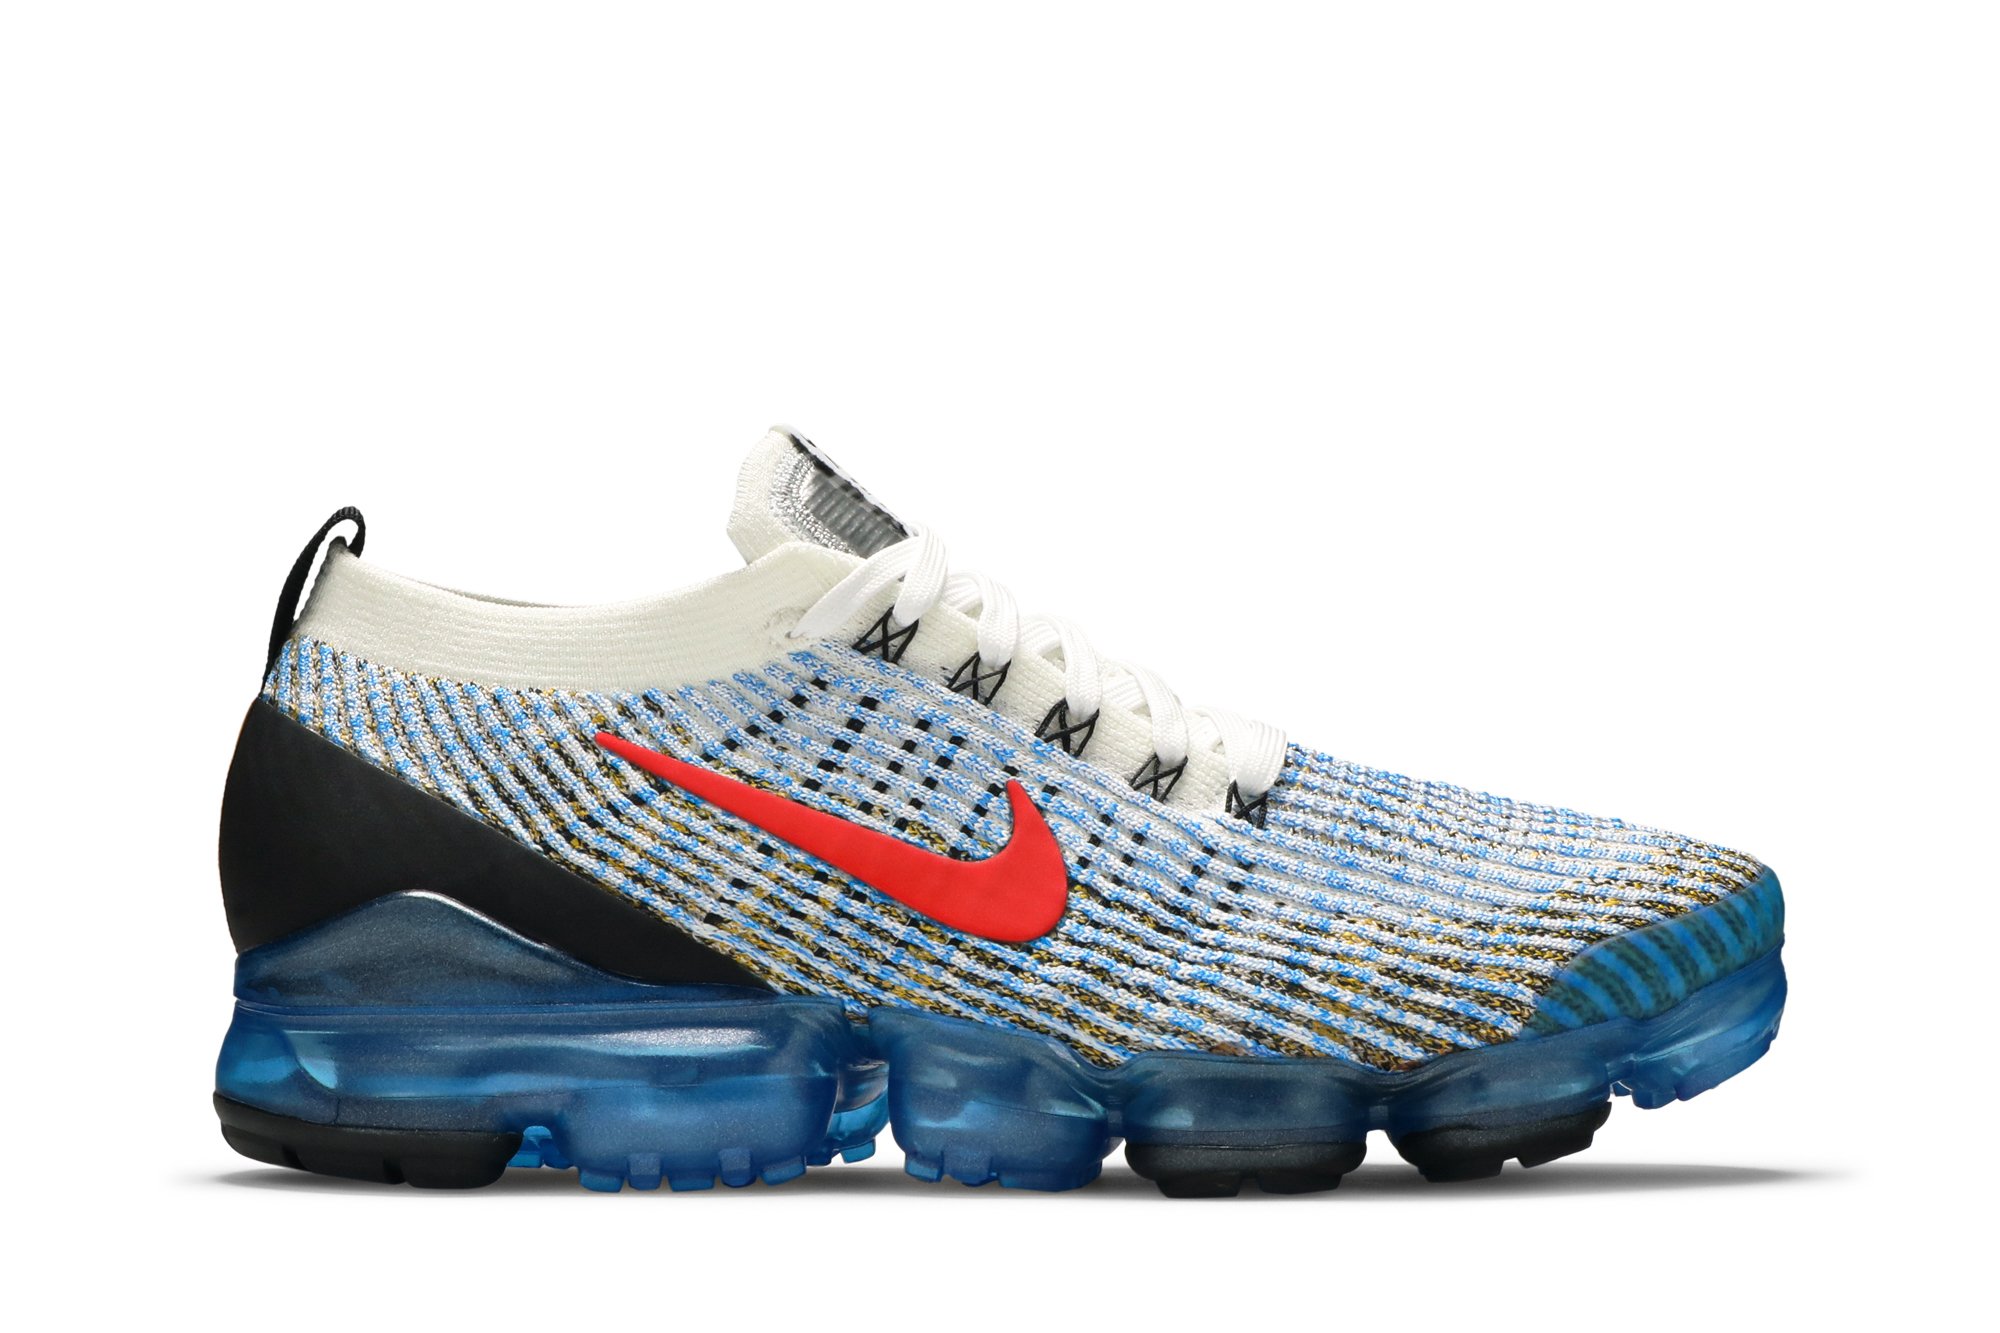 vapormax flyknit 3 blue and yellow